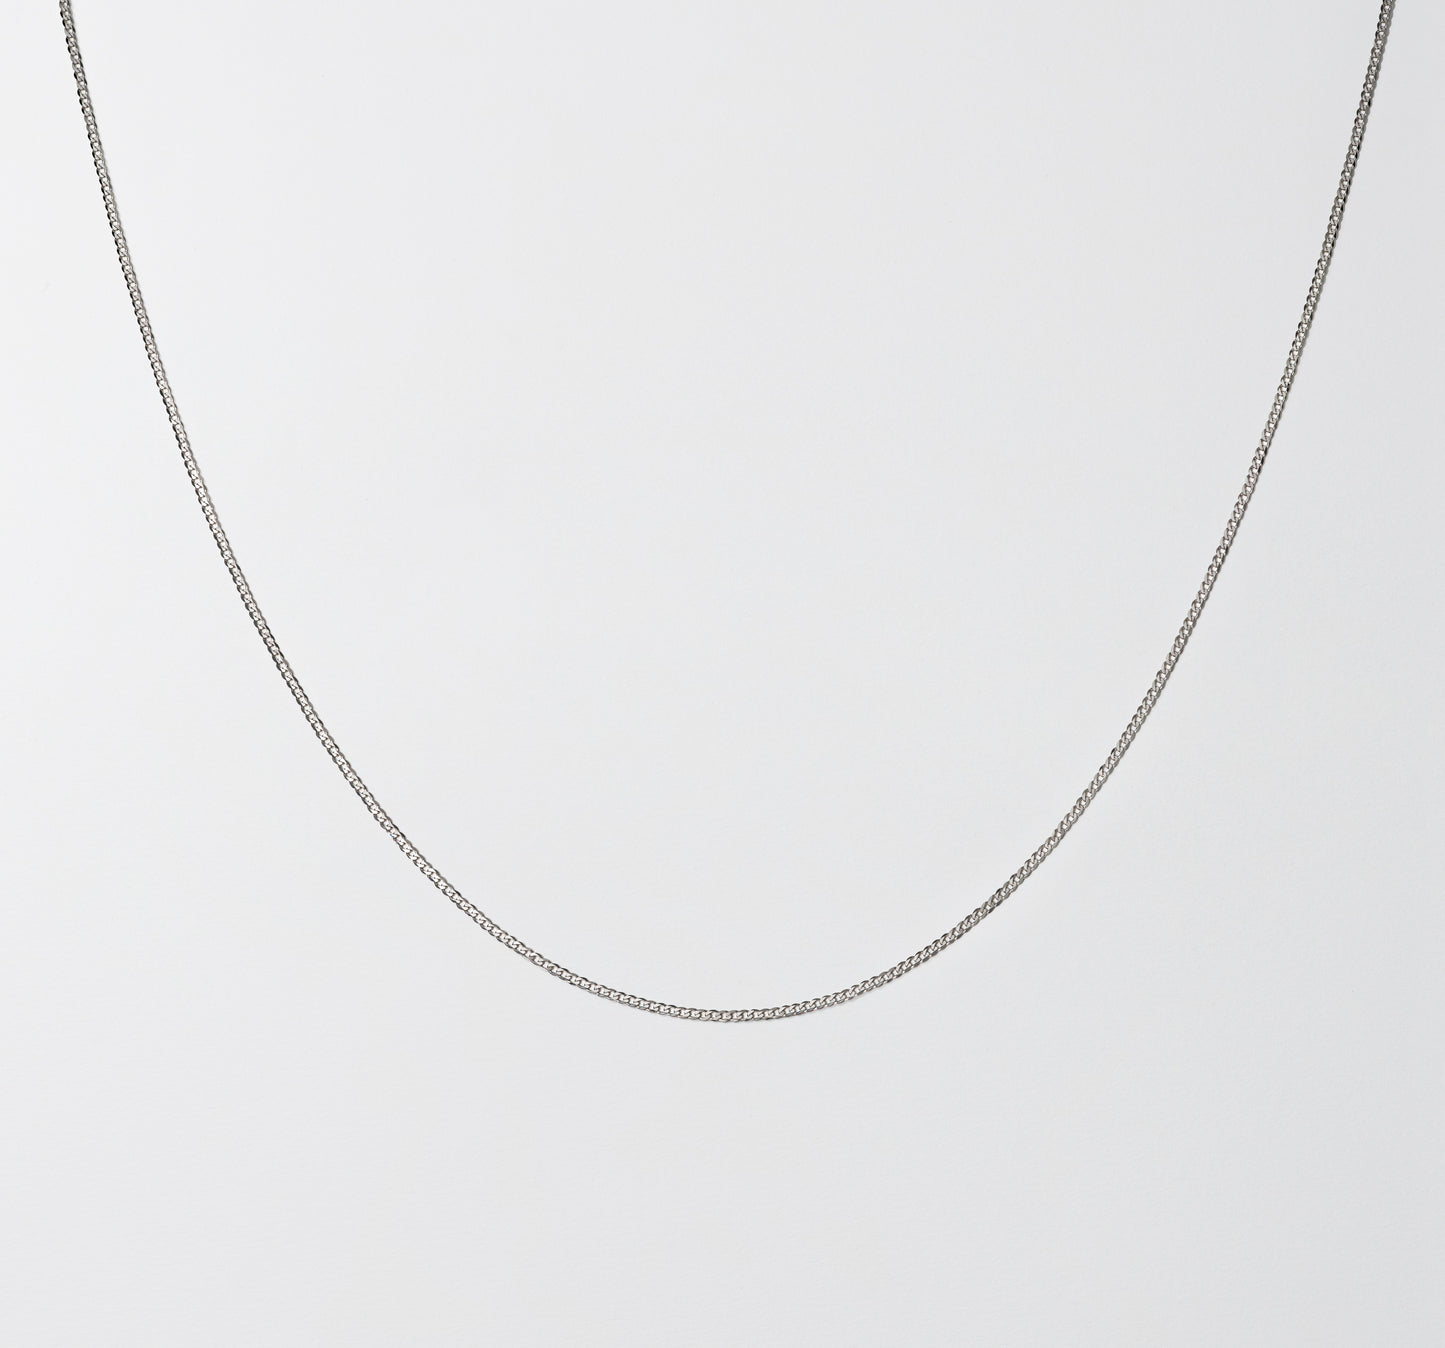 White Gold Curb Chain - Polished 1.95mm